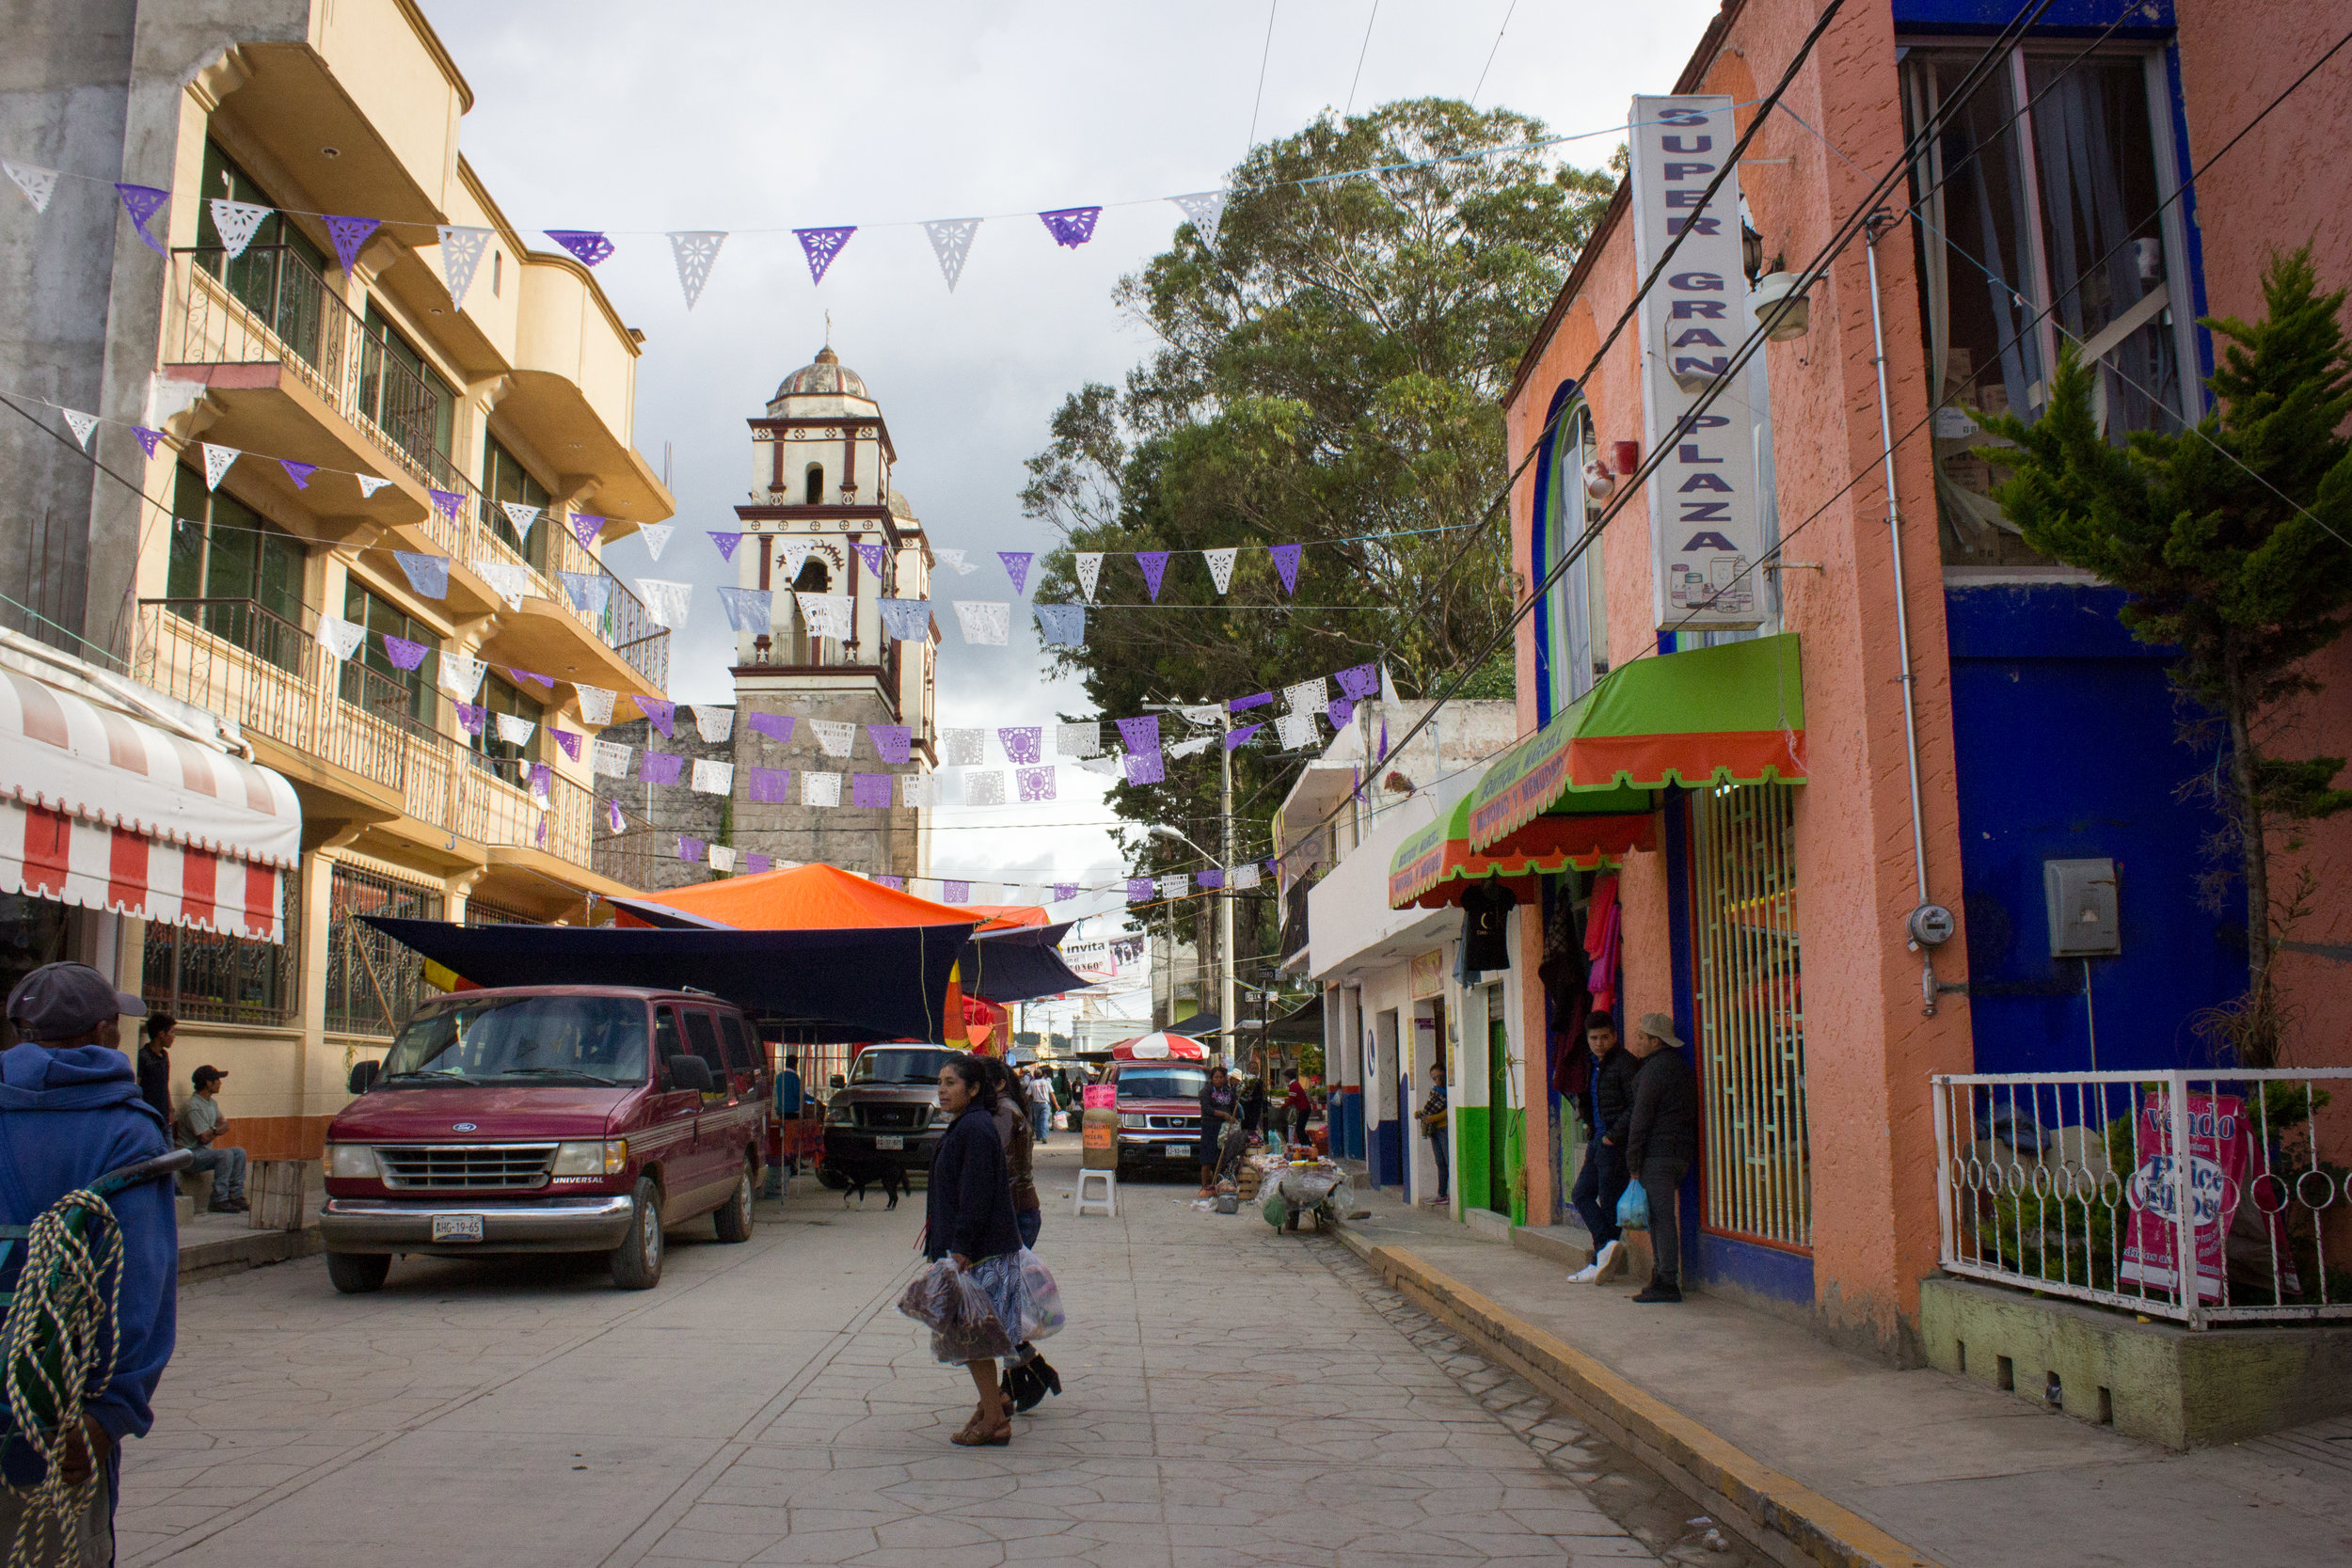  The town of Chalcatongo, where twelve of us caravanned on June 28. Ilene and I spent four nights here, spending the majority of our trip   with the Ruiz family and their church body in the village of nearby Chapultepec. 